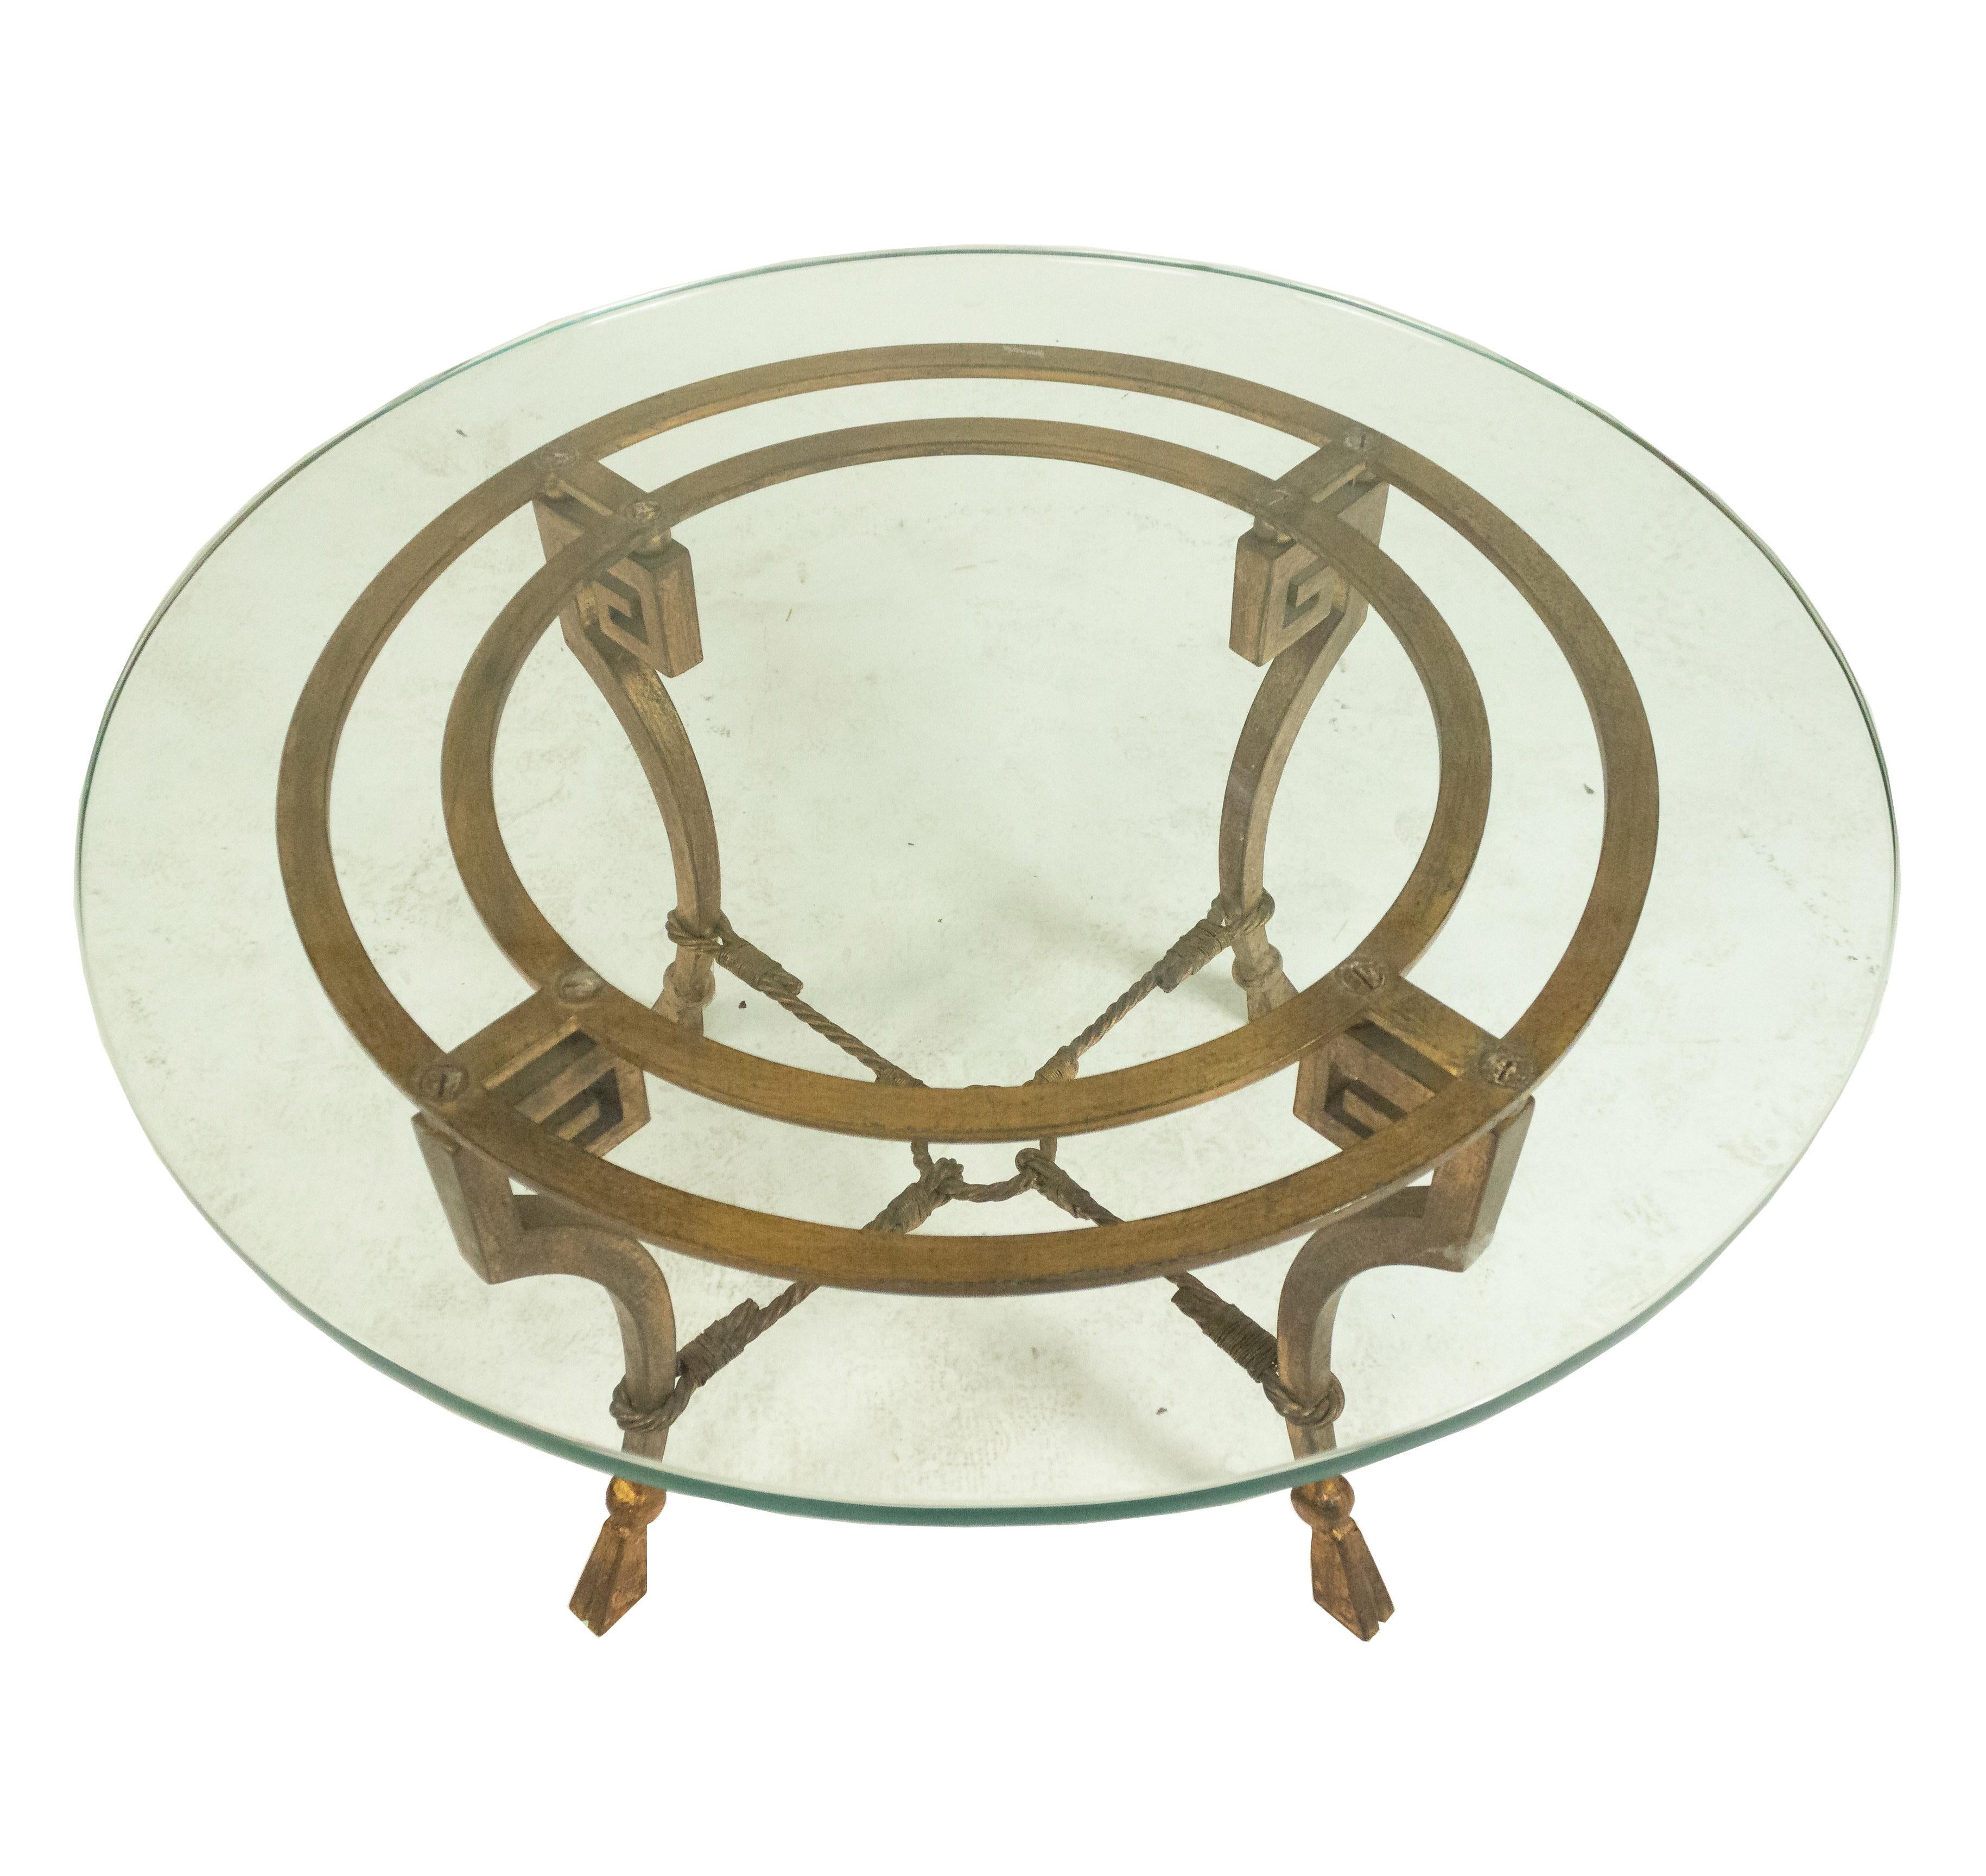 French 1940s Maison Ramsay neoclassical gilt iron coffee table with rope shaped stretcher legs and detachable round glass top.